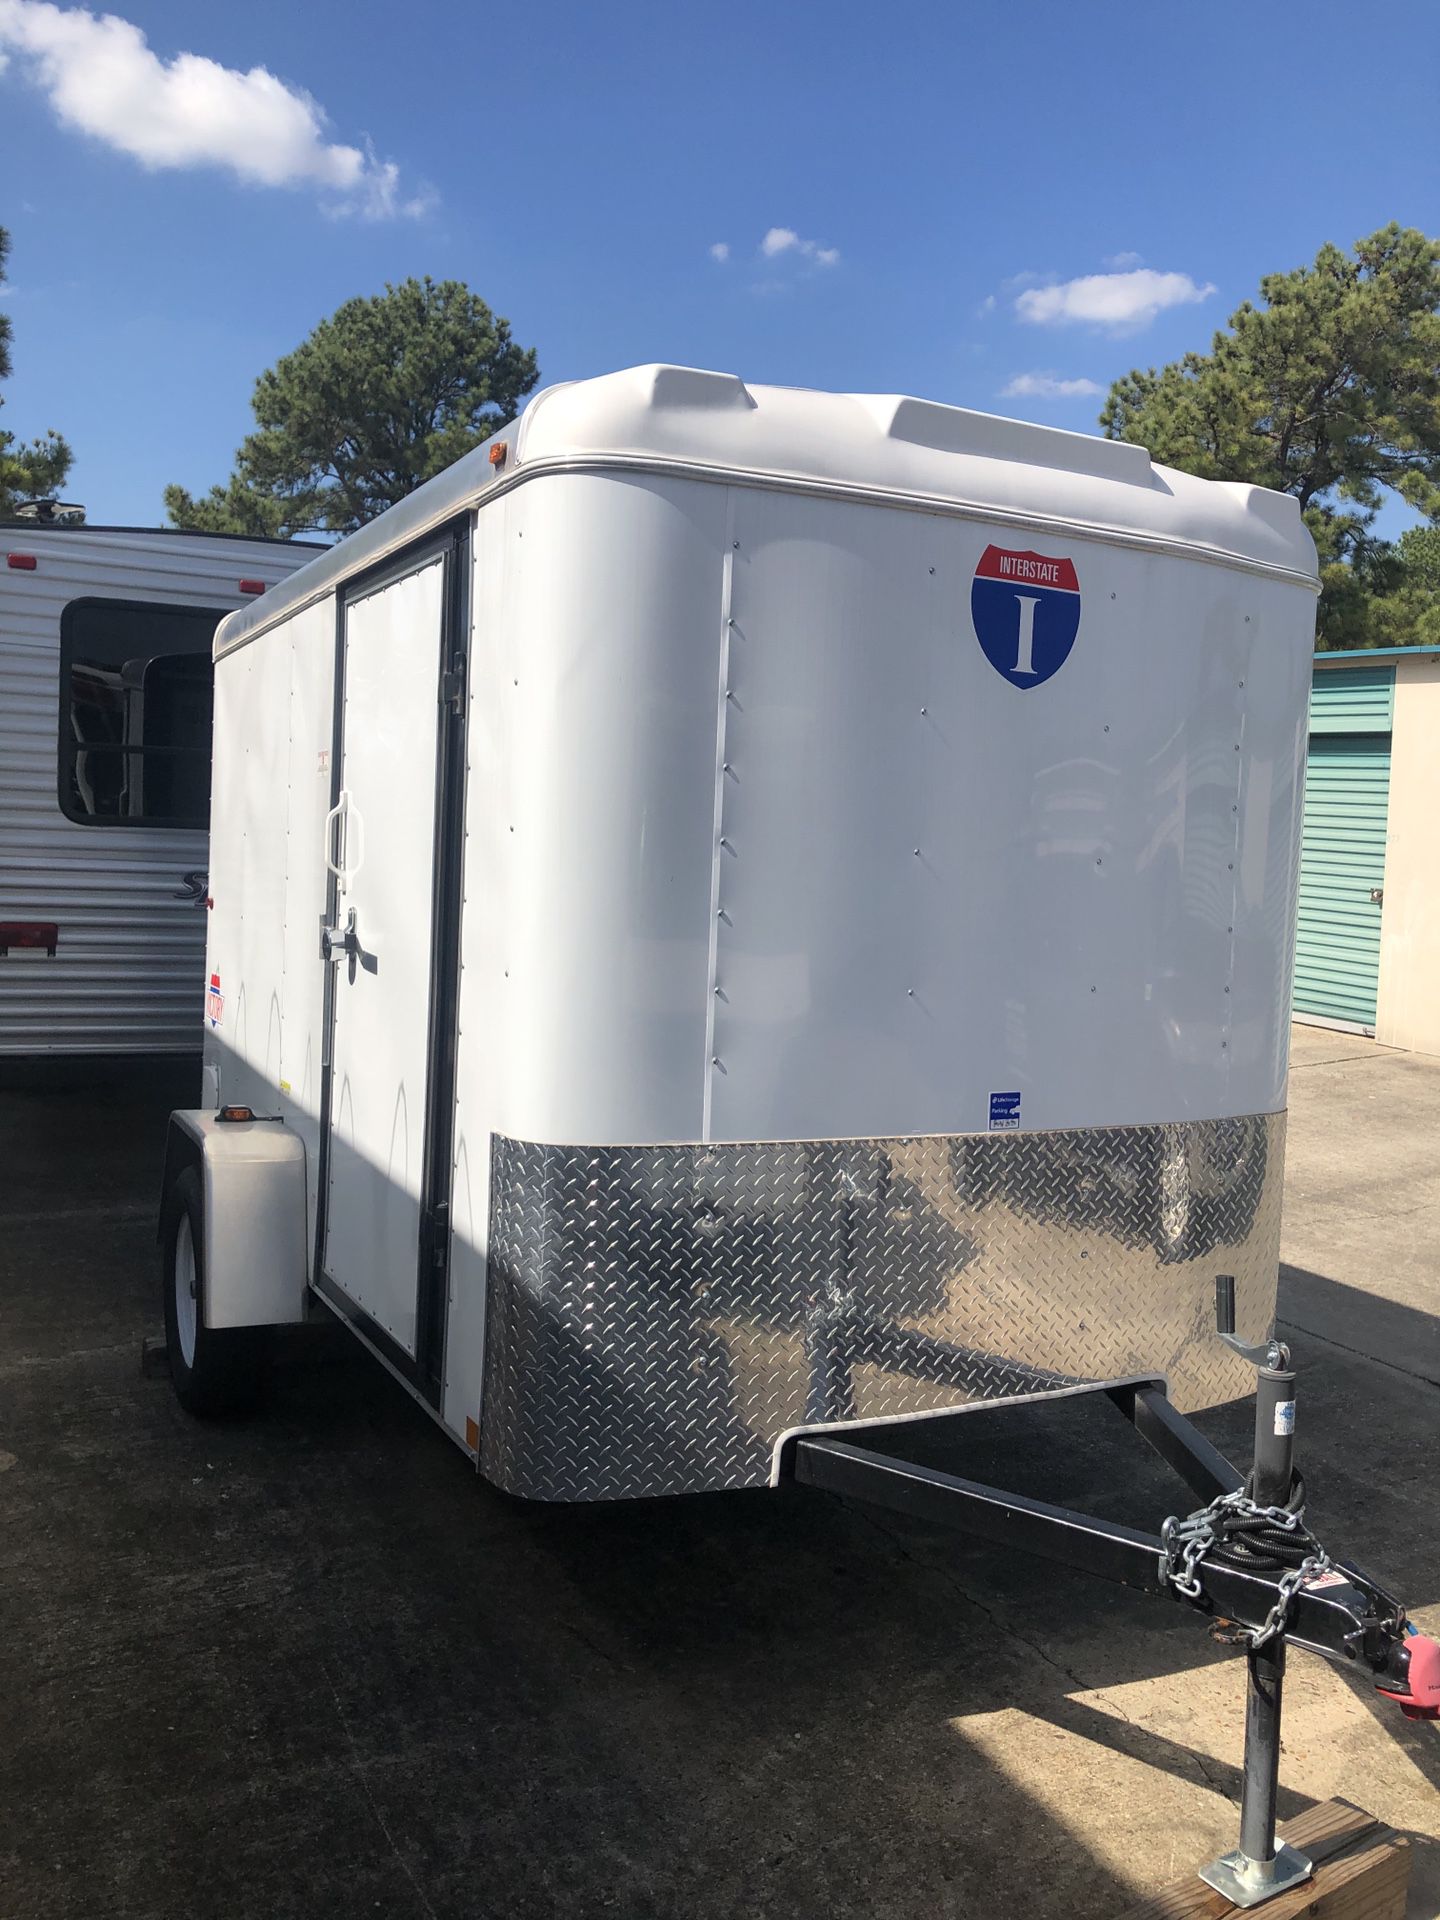 For sale new 2020 box trailer white,Manufacture:Interstate. 6x10 victory single axle. Including trailer conector adapter,tool lug wrench, hitch pin